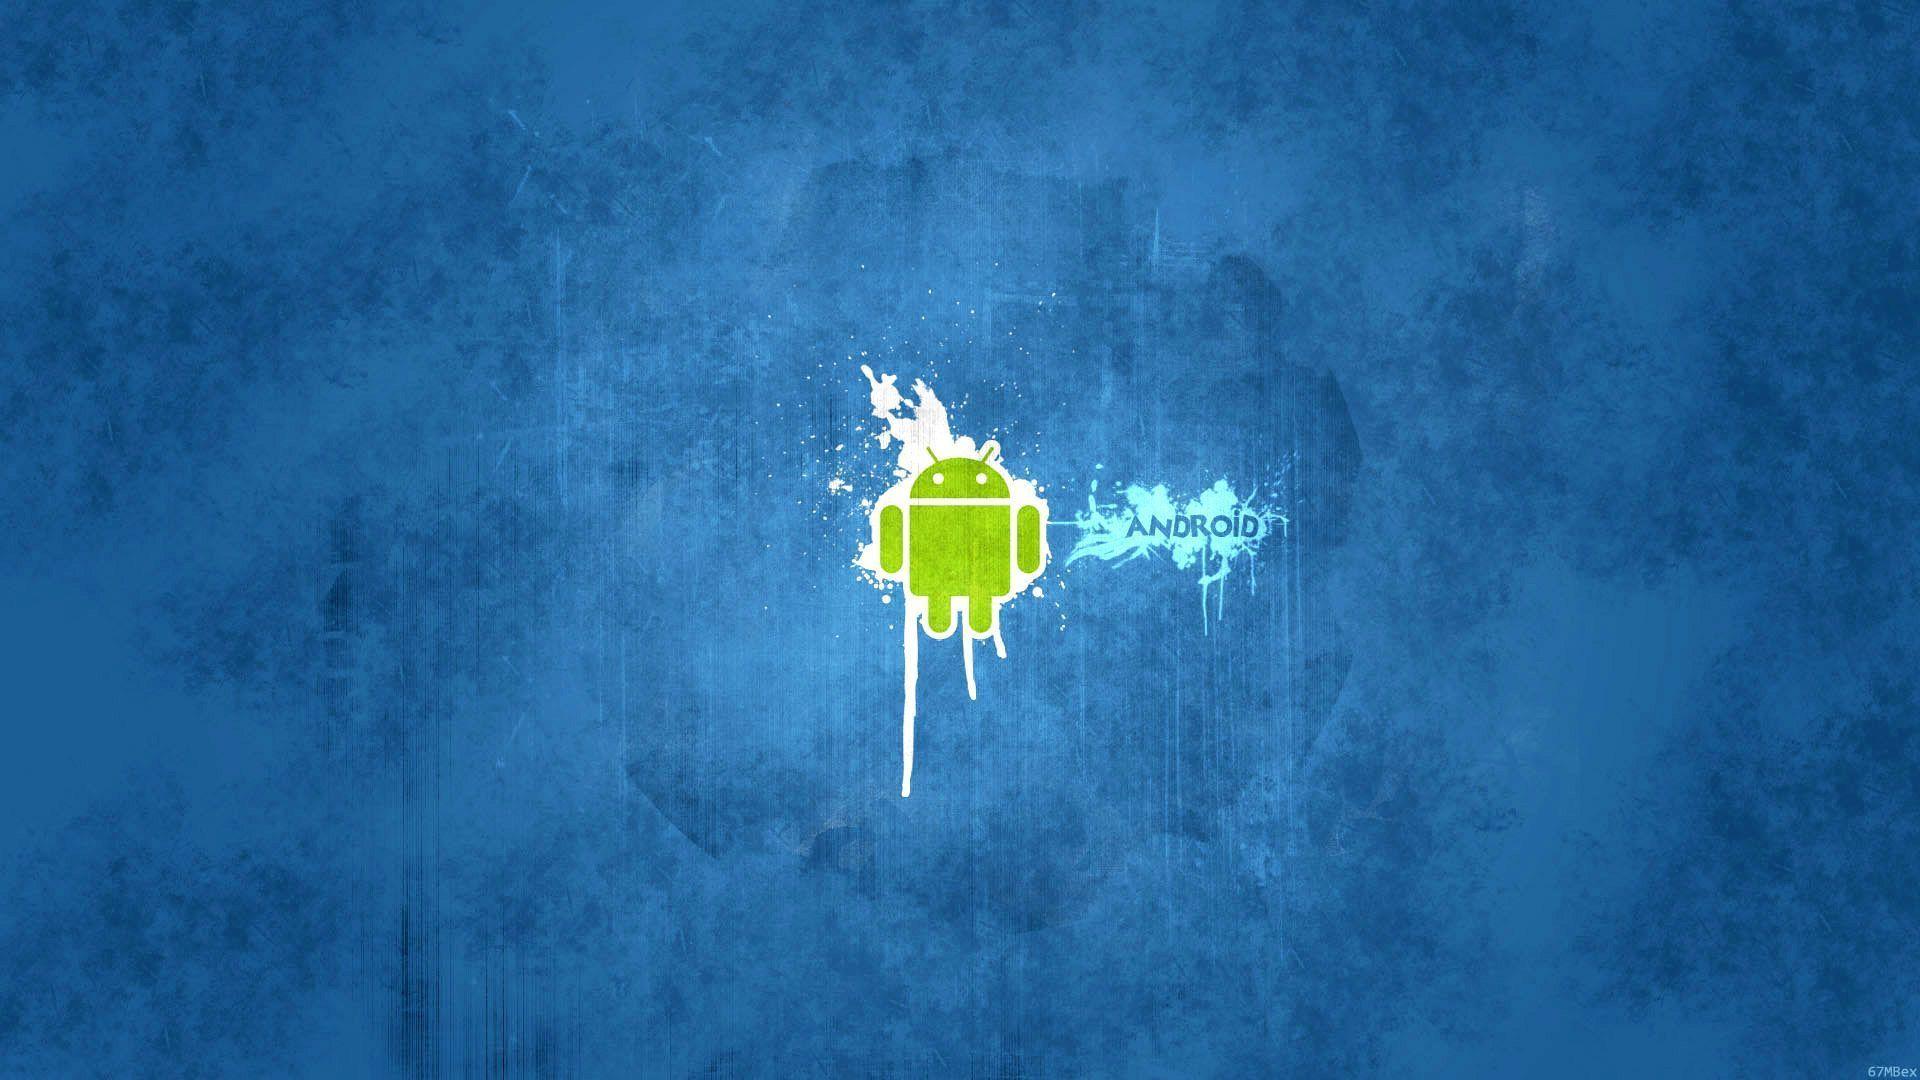 Wallpaper For > Blue Android Wallpaper